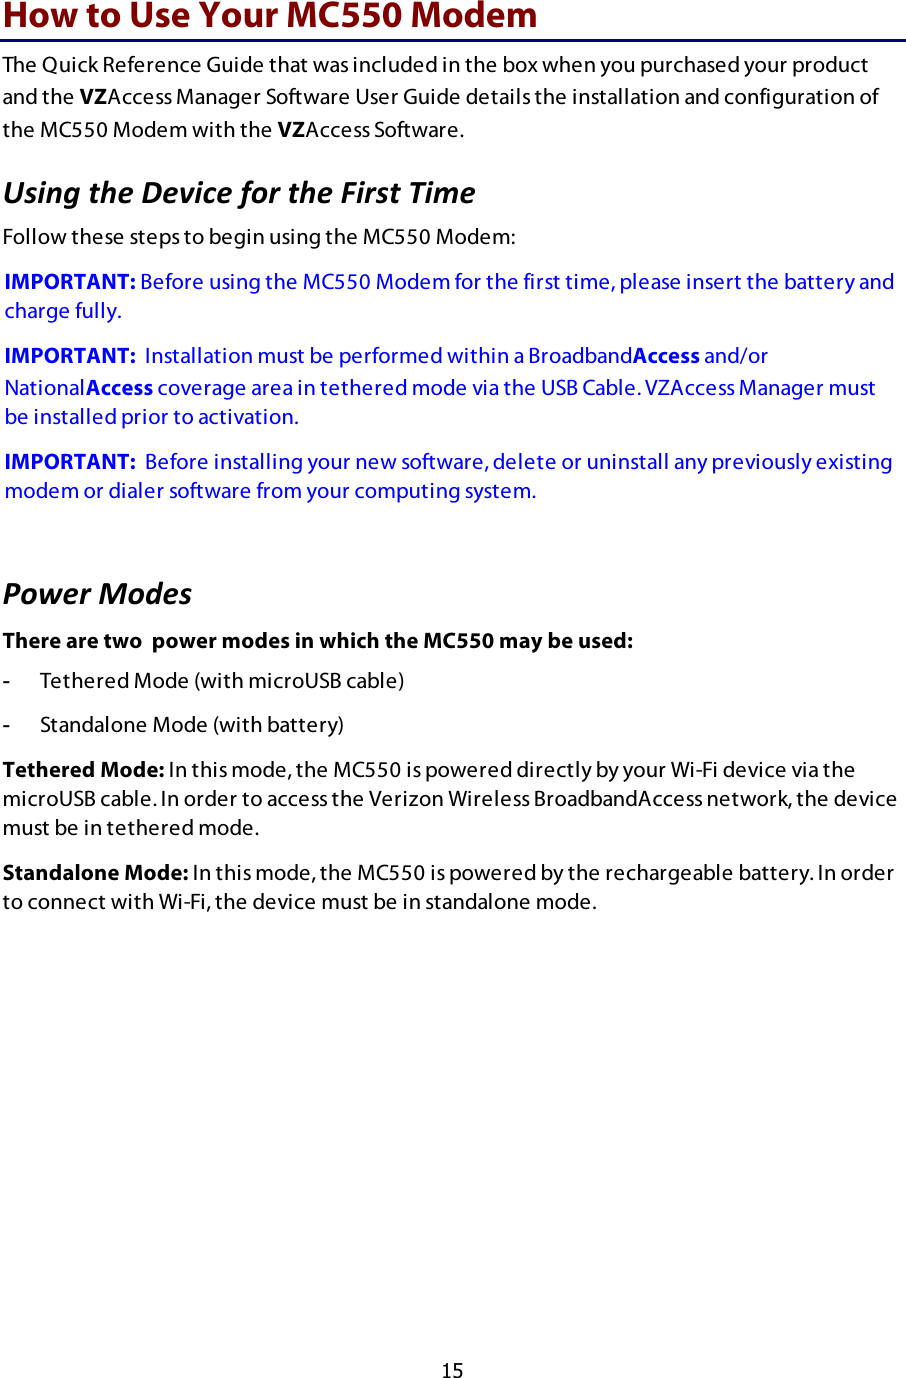  15 How to Use Your MC550 Modem The Quick Reference Guide that was included in the box when you purchased your product and the VZAccess Manager Software User Guide details the installation and configuration of the MC550 Modem with the VZAccess Software.  G79:0$3&quot;#$H#B9.#$2)6$3&quot;#$I9673$!9+#$$Follow these steps to begin using the MC550 Modem:  IMPORTANT: Before using the MC550 Modem for the first time, please insert the battery and charge fully. IMPORTANT:  Installation must be performed within a BroadbandAccess and/or NationalAccess coverage area in tethered mode via the USB Cable. VZAccess Manager must be installed prior to activation. IMPORTANT:  Before installing your new software, delete or uninstall any previously existing modem or dialer software from your computing system.  ,)J#6$%)*#7$There are two  power modes in which the MC550 may be used: -  Tethered Mode (with microUSB cable) -  Standalone Mode (with battery) Tethered Mode: In this mode, the MC550 is powered directly by your Wi-Fi device via the microUSB cable. In order to access the Verizon Wireless BroadbandAccess network, the device must be in tethered mode. Standalone Mode: In this mode, the MC550 is powered by the rechargeable battery. In order to connect with Wi-Fi, the device must be in standalone mode. 